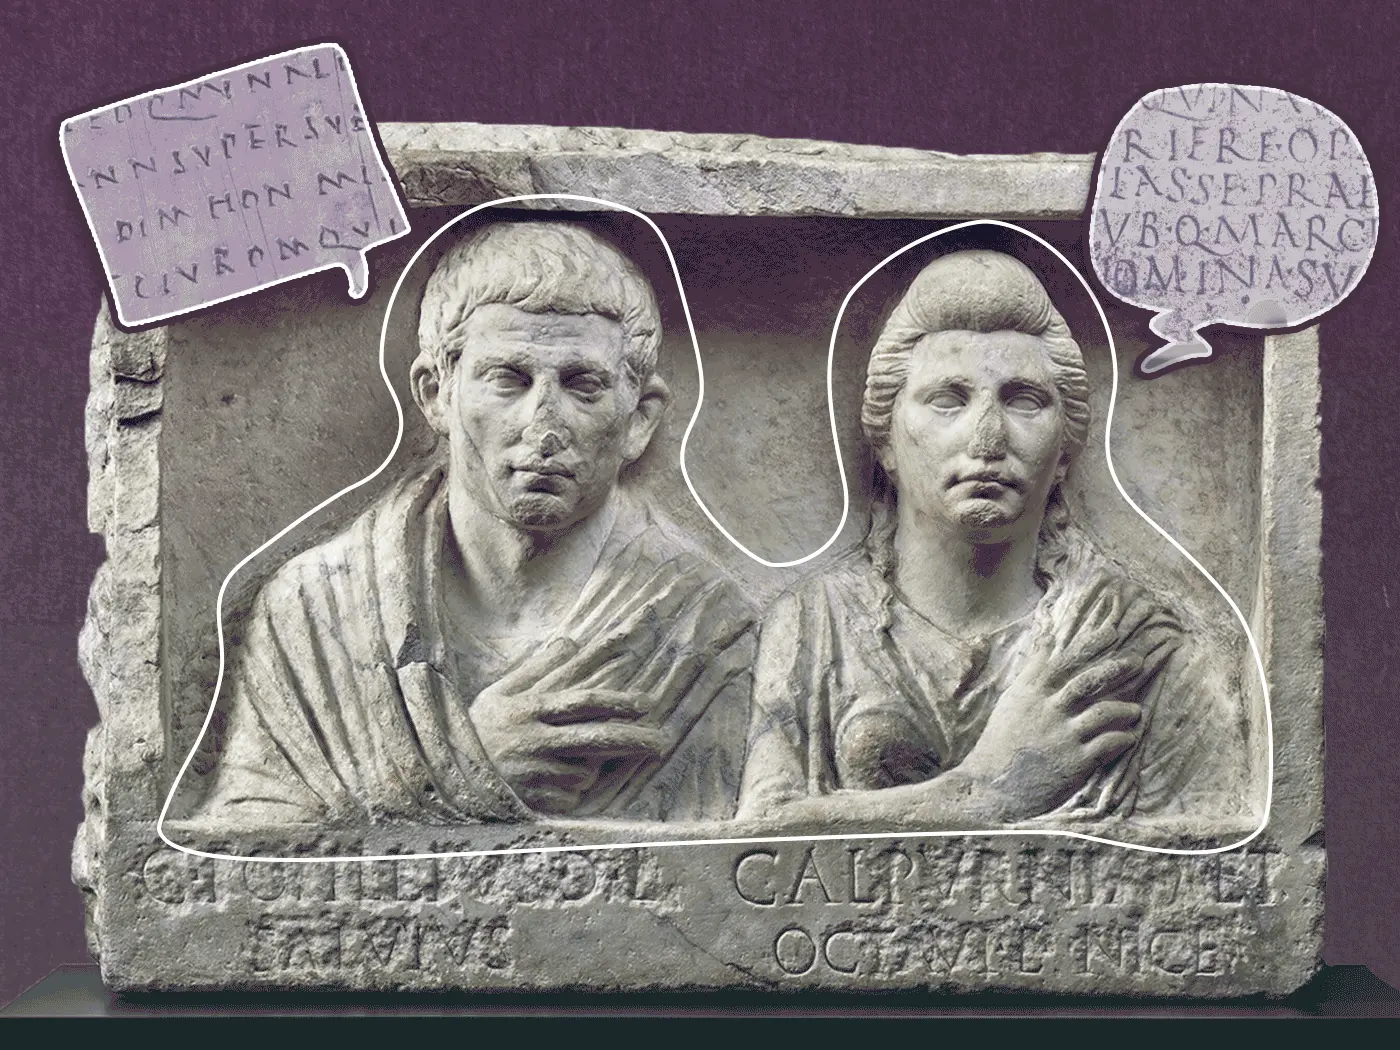 Illustration of Roman couple with Latin speech bubbles next to their heads